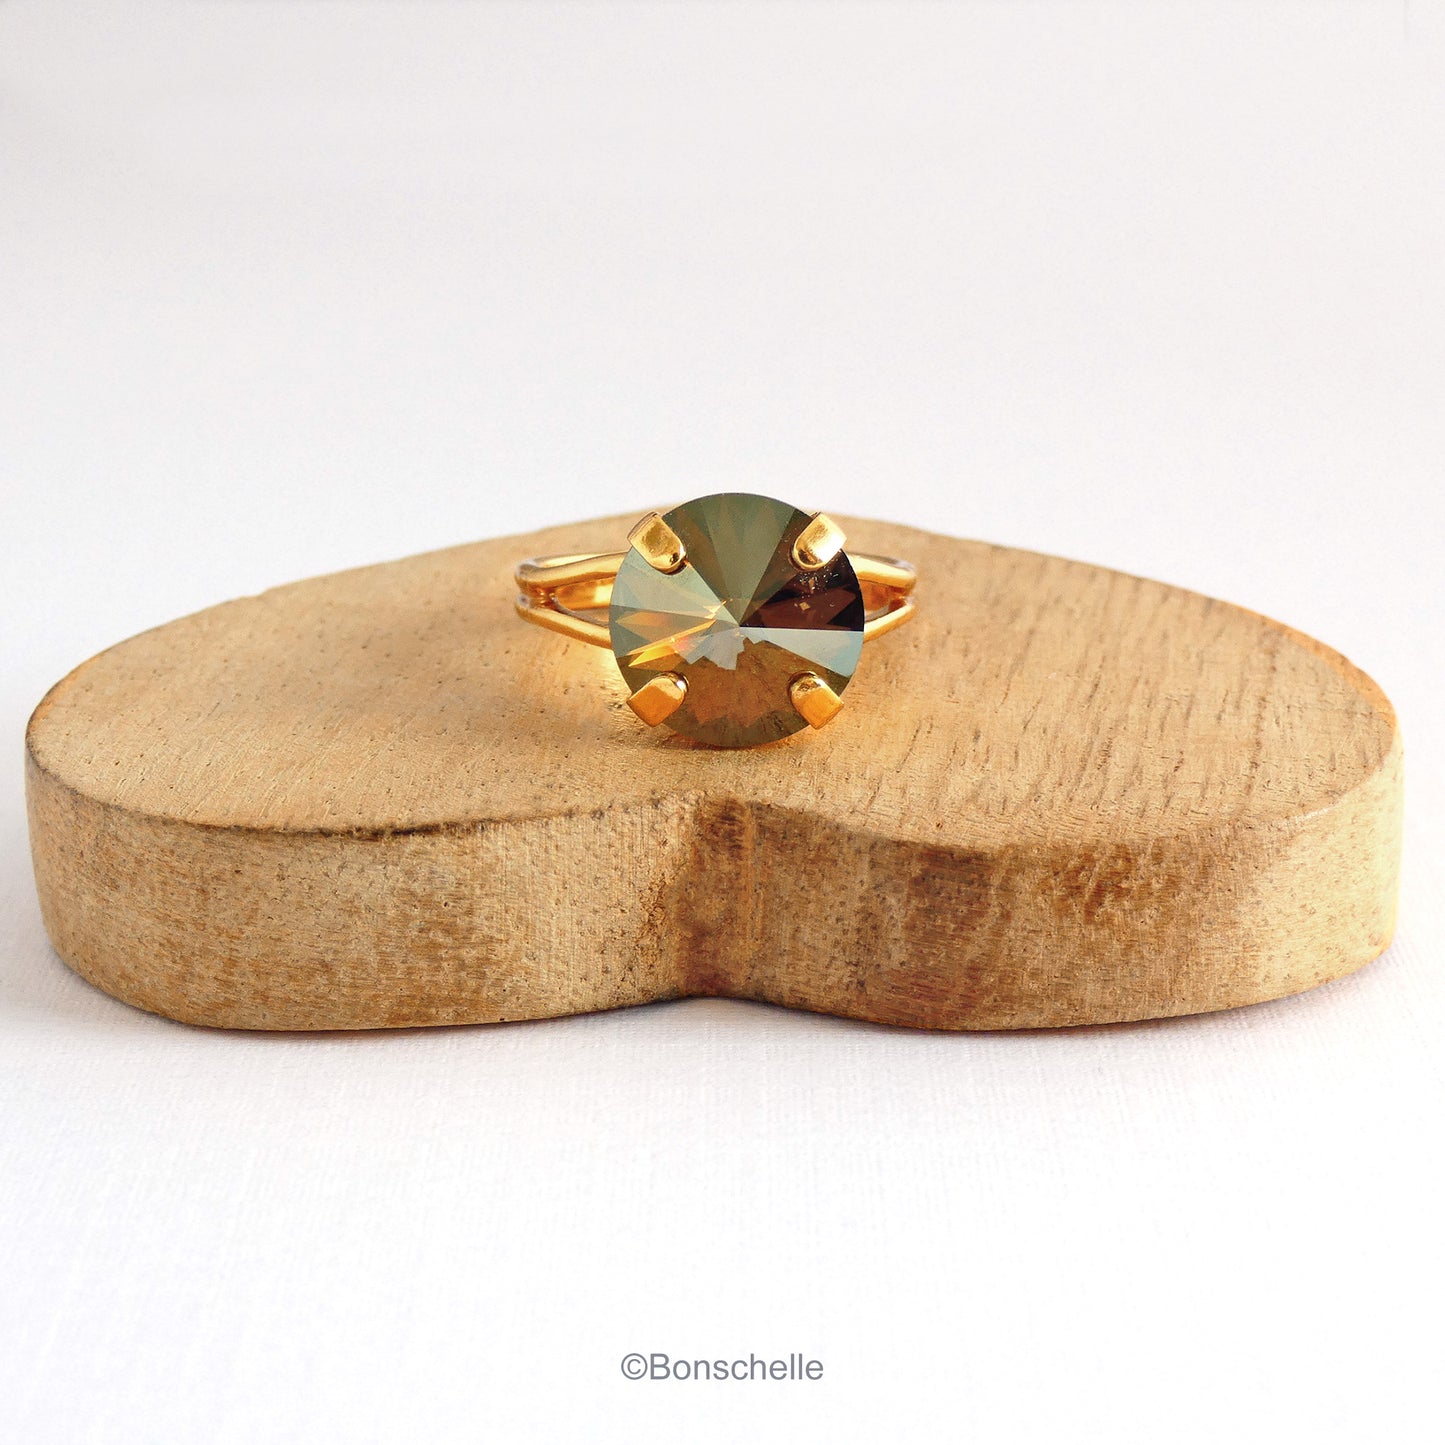 Front view of the 24K gold plate  solitaire ring for women with a deep bronze Swarovksi crystal stone.